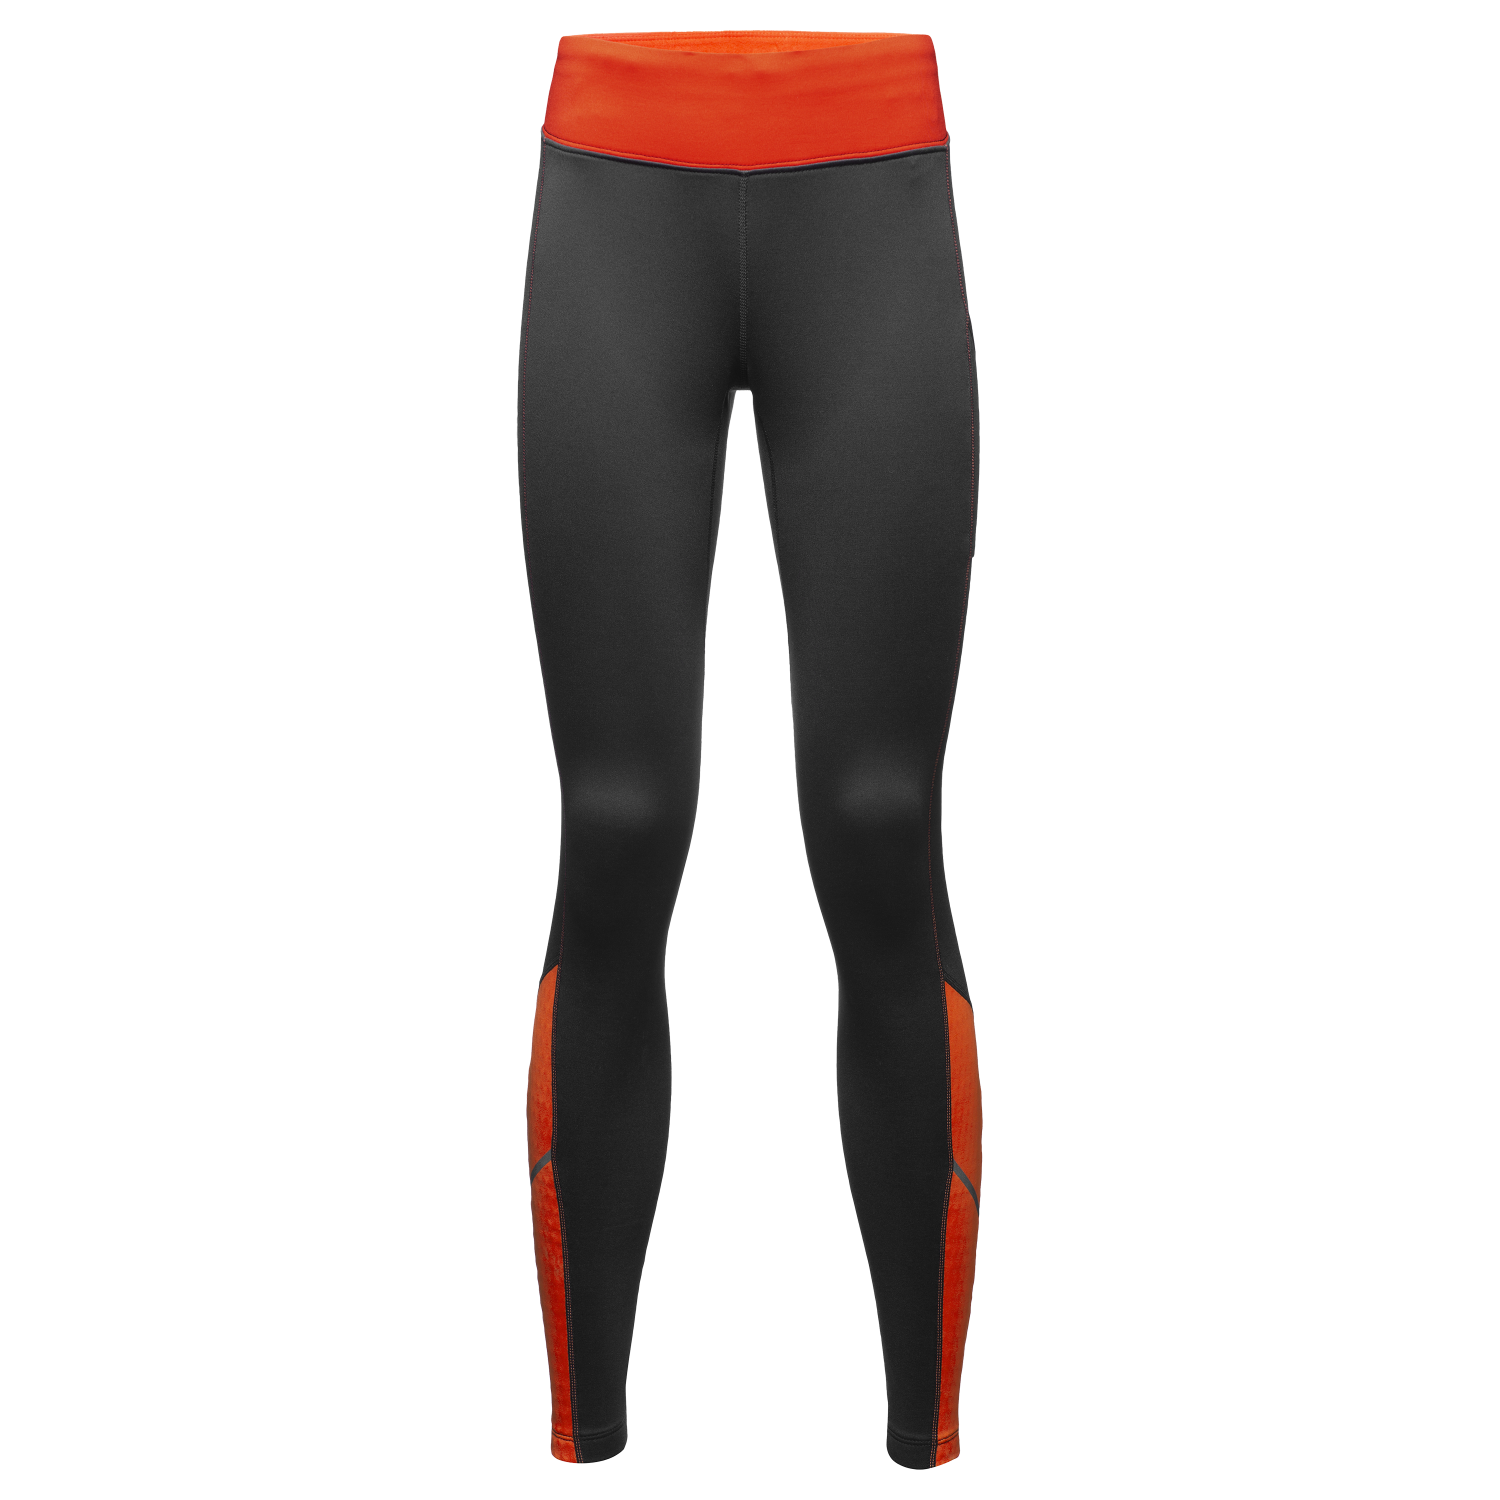 GOREWEAR R3 Women's Thermo Running Tights in Black/Fireball | Small (4-6) | Slim fit